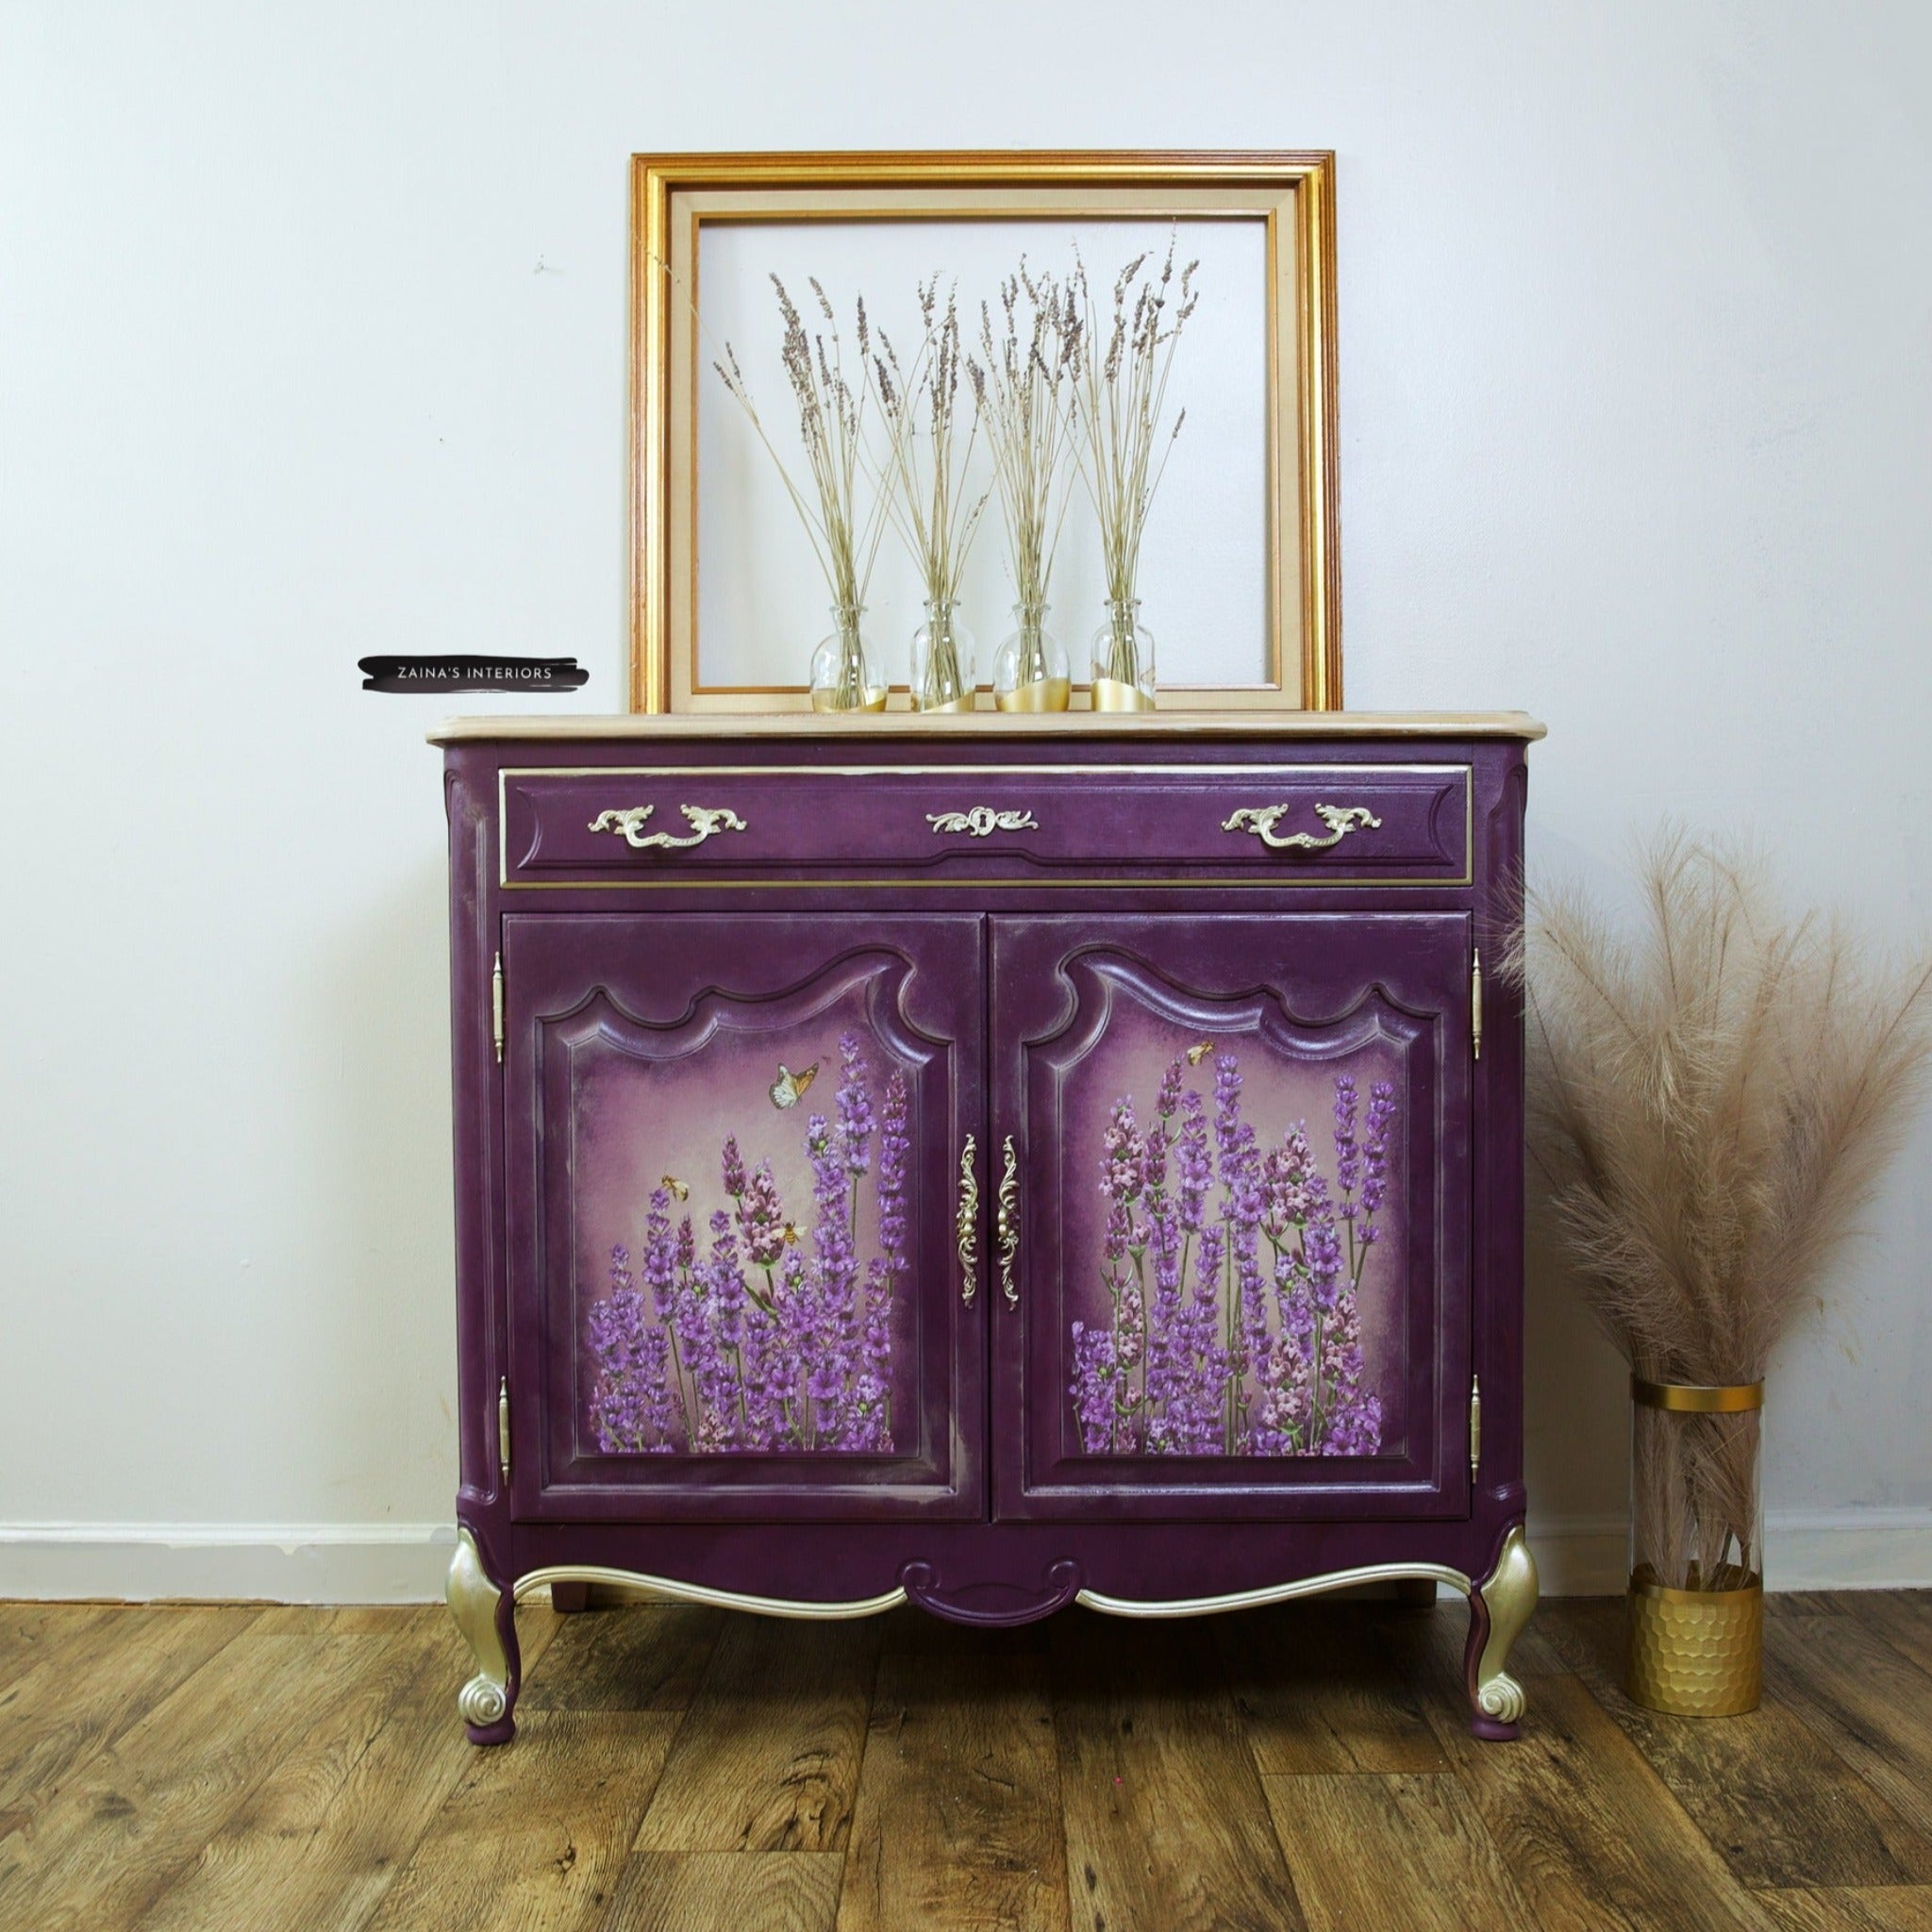 A French Provencial small buffet table refurbished by Zaina's Interiors is painted eggplant purple and features ReDesign with Prima's Champs de Lavende transfer on its 2 door inlays.